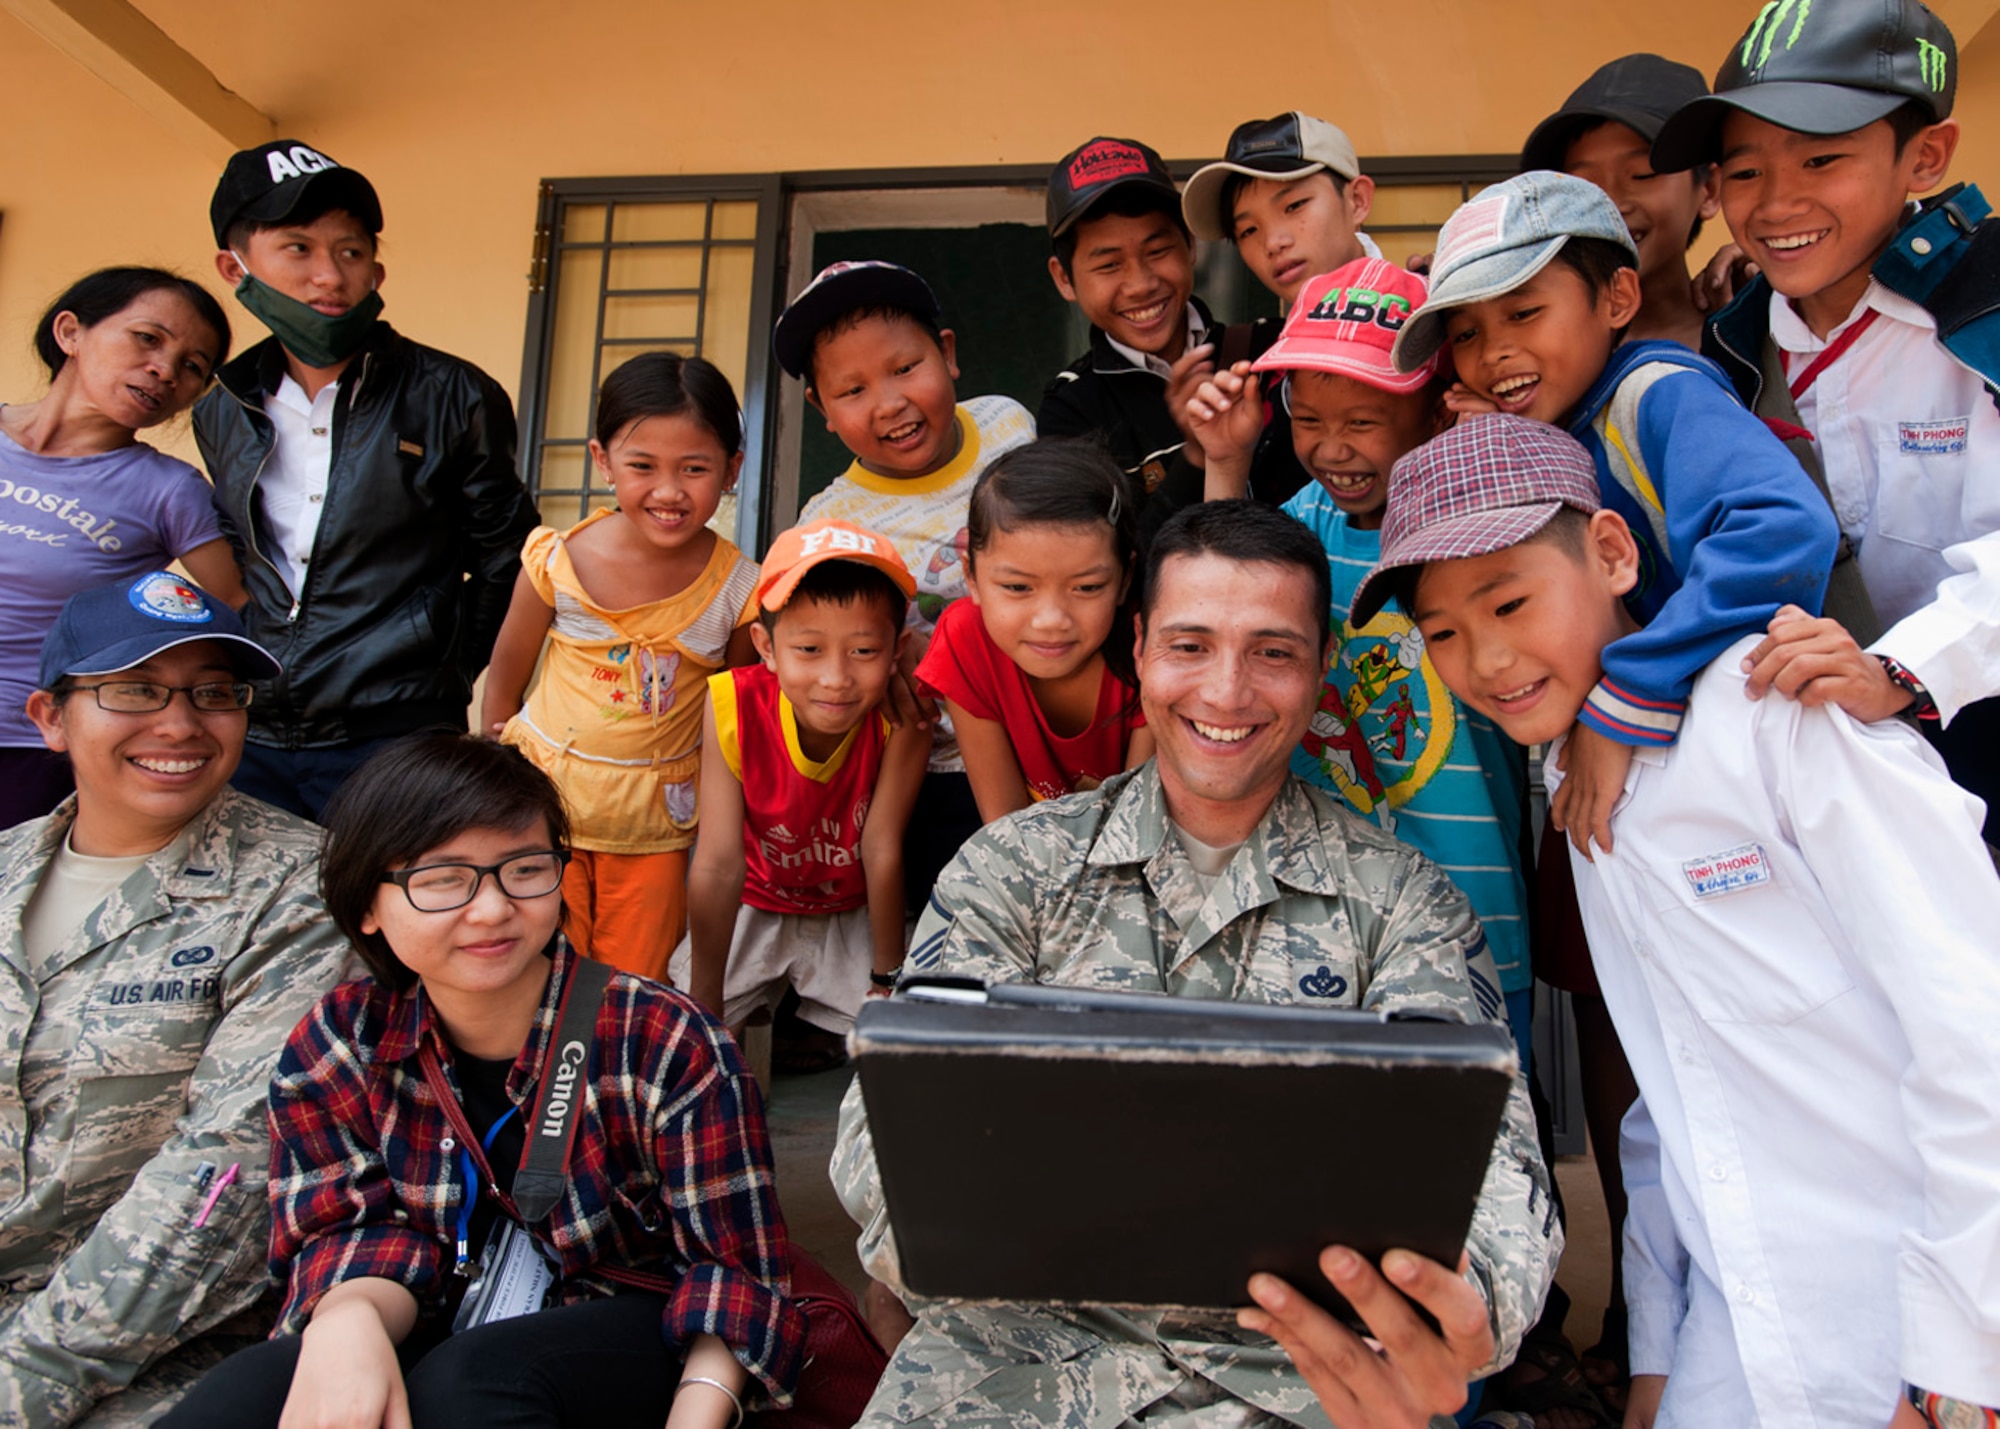 Master Sgt. Erick Lizarraga, an 18th Civil Engineer Squadron structural maintenance craftsman, entertains local youth at South Tinh Phong Primary School, Quang Ngai Province, Vietnam, during an engineering project March 26, 2015. Efforts undertaken during Operation Pacific Angel 2015 help militaries across the Pacific improve and build relationships in a wide spectrum of civic operations, which bolster each nation's capacity to respond and support future humanitarian assistance and disaster relief operations. (U.S. Air Force photo/Staff Sgt. Tong Duong)